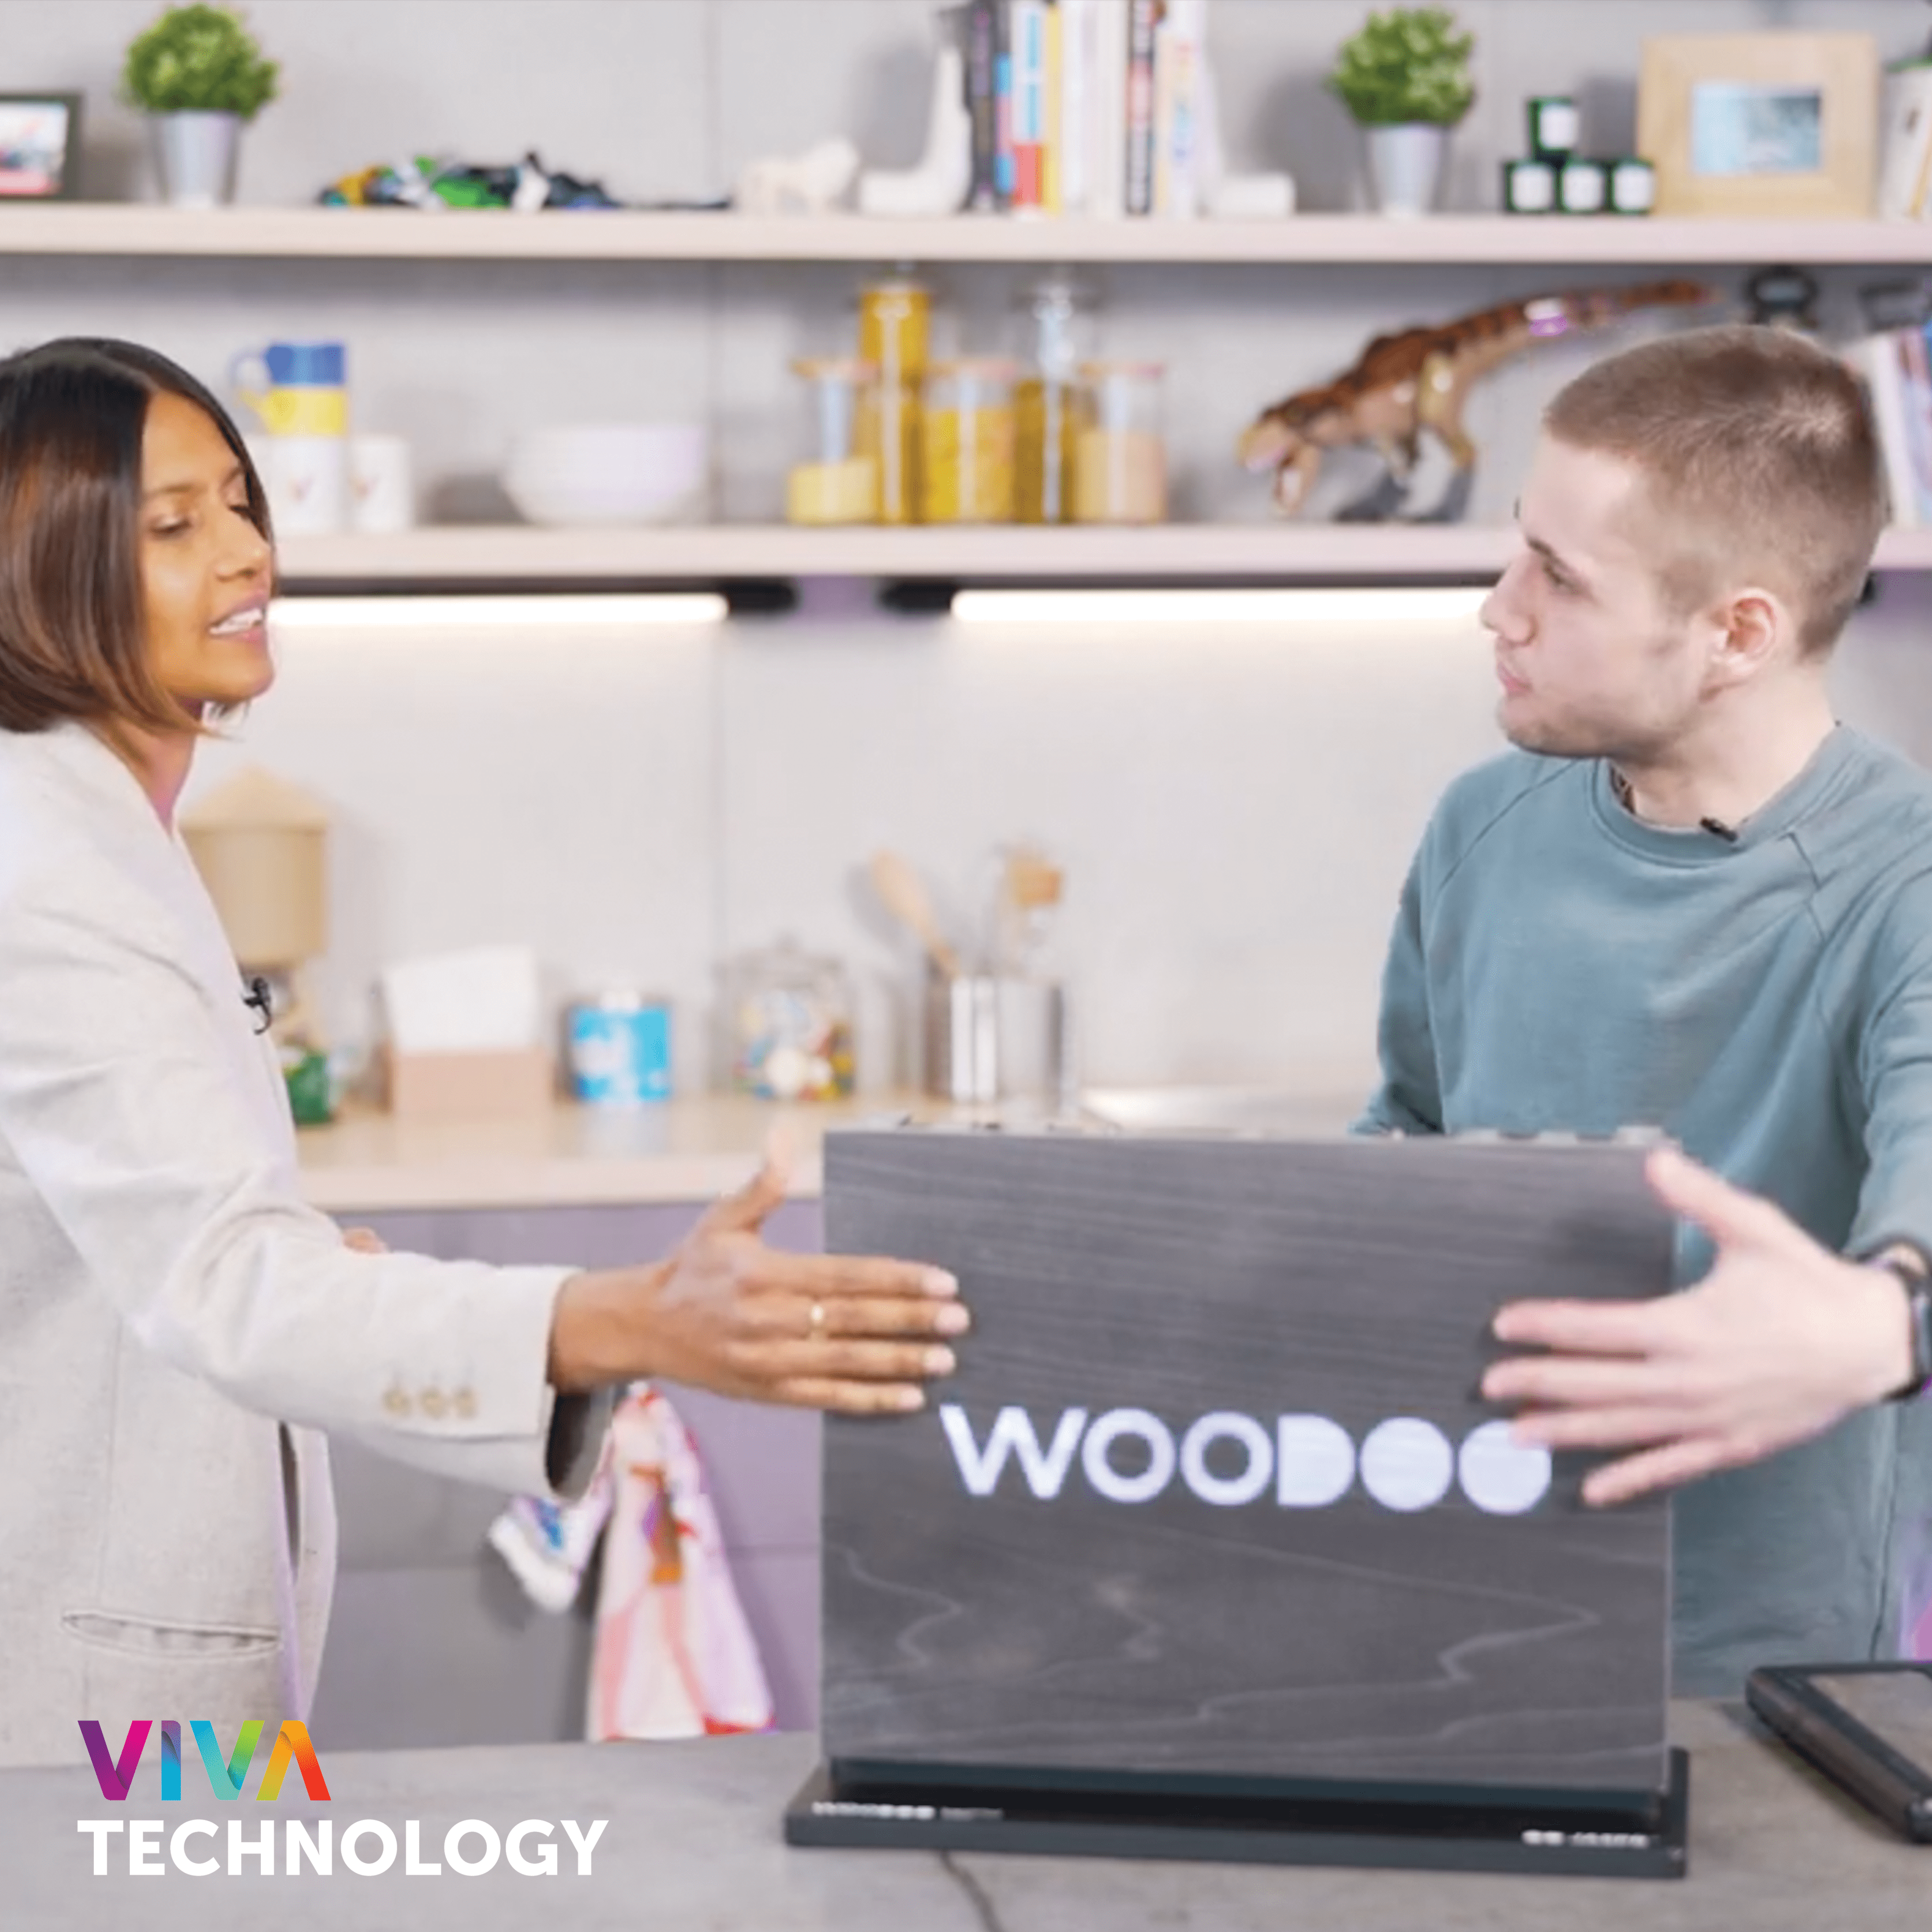 Viva Technology presents our innovative Woodoo applications